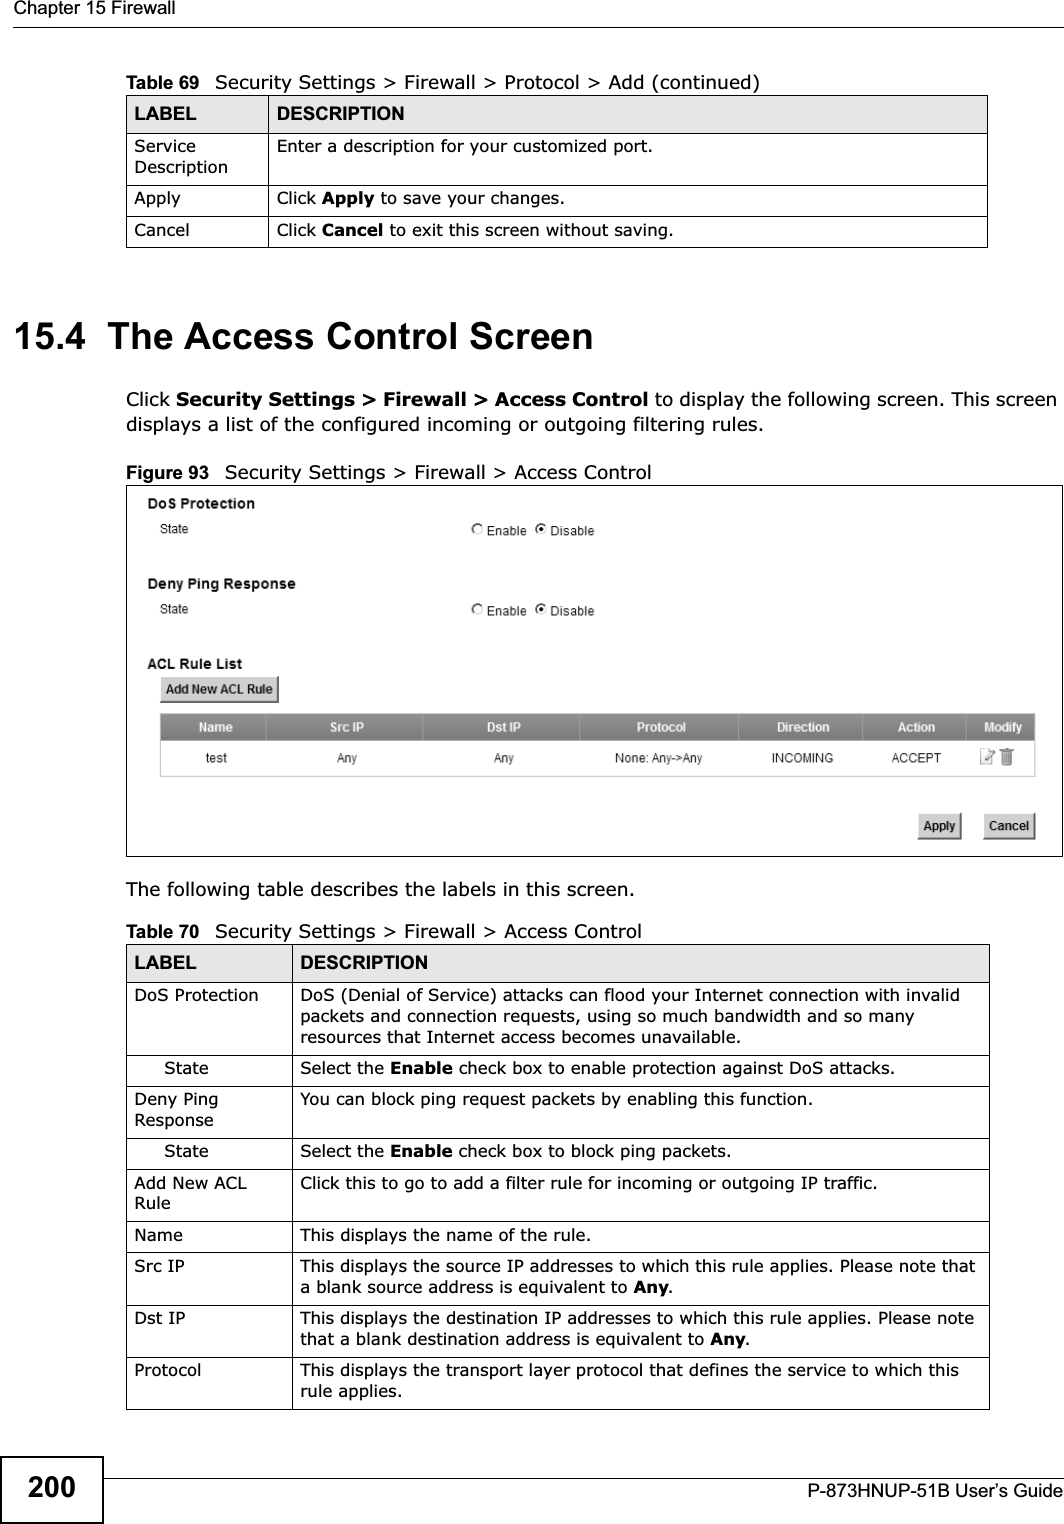 Chapter 15 FirewallP-873HNUP-51B User’s Guide20015.4  The Access Control ScreenClick Security Settings &gt; Firewall &gt; Access Control to display the following screen. This screen displays a list of the configured incoming or outgoing filtering rules. Figure 93   Security Settings &gt; Firewall &gt; Access Control The following table describes the labels in this screen. Service DescriptionEnter a description for your customized port.Apply Click Apply to save your changes.Cancel Click Cancel to exit this screen without saving.Table 69   Security Settings &gt; Firewall &gt; Protocol &gt; Add (continued)LABEL DESCRIPTIONTable 70   Security Settings &gt; Firewall &gt; Access ControlLABEL DESCRIPTIONDoS Protection DoS (Denial of Service) attacks can flood your Internet connection with invalid packets and connection requests, using so much bandwidth and so many resources that Internet access becomes unavailable. State Select the Enable check box to enable protection against DoS attacks.Deny Ping ResponseYou can block ping request packets by enabling this function.State Select the Enable check box to block ping packets.Add New ACL RuleClick this to go to add a filter rule for incoming or outgoing IP traffic.Name This displays the name of the rule.Src IP  This displays the source IP addresses to which this rule applies. Please note that a blank source address is equivalent to Any.Dst IP This displays the destination IP addresses to which this rule applies. Please note that a blank destination address is equivalent to Any.Protocol This displays the transport layer protocol that defines the service to which this rule applies. 